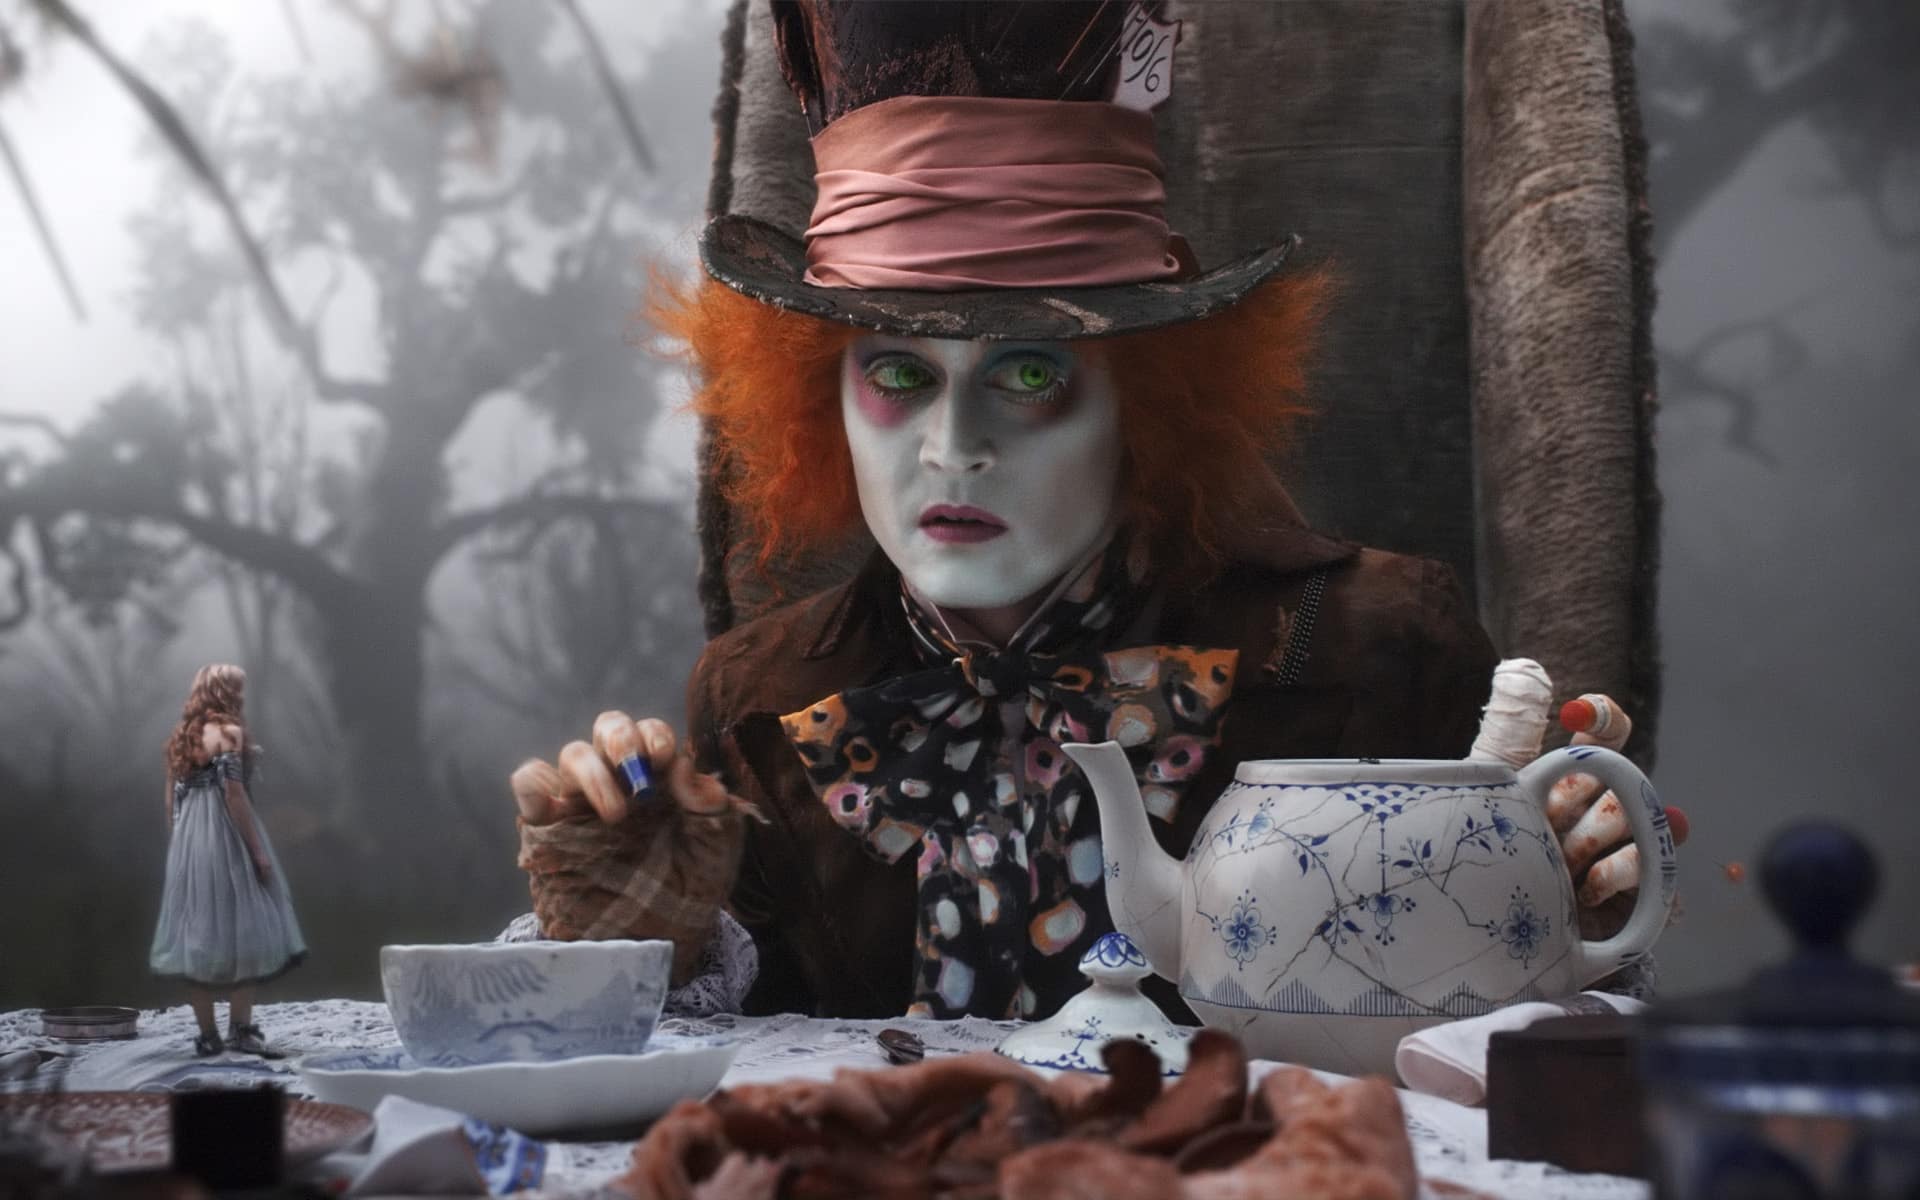 Johnny Depp as the Mad Hatter hosting a tea party in Disney's live-action Alice in Wonderland.